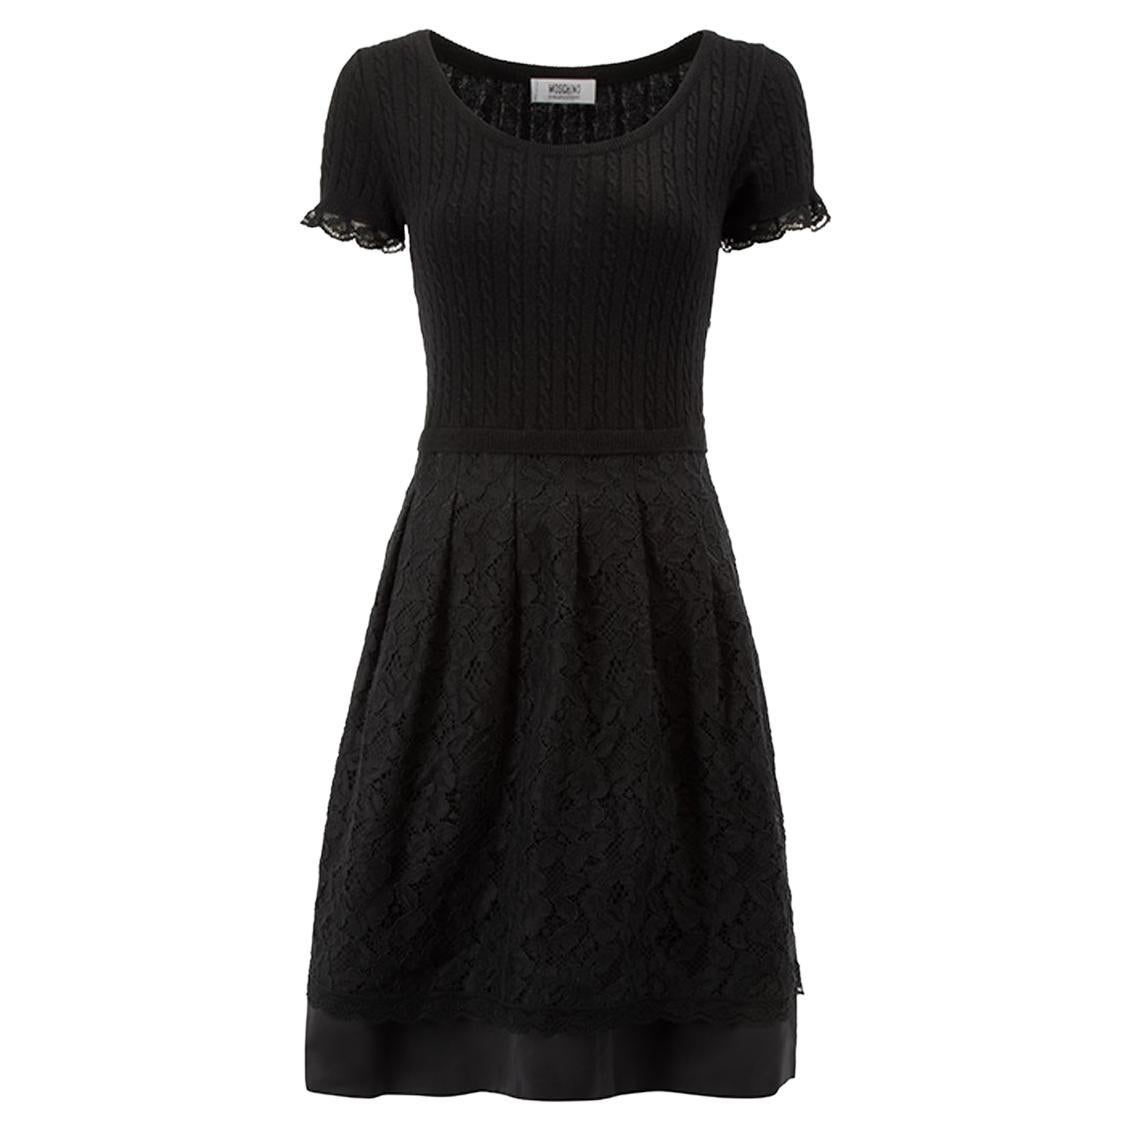 Moschino Women's Moschino Cheap and Chic Black Knit Top Knee Length Dress